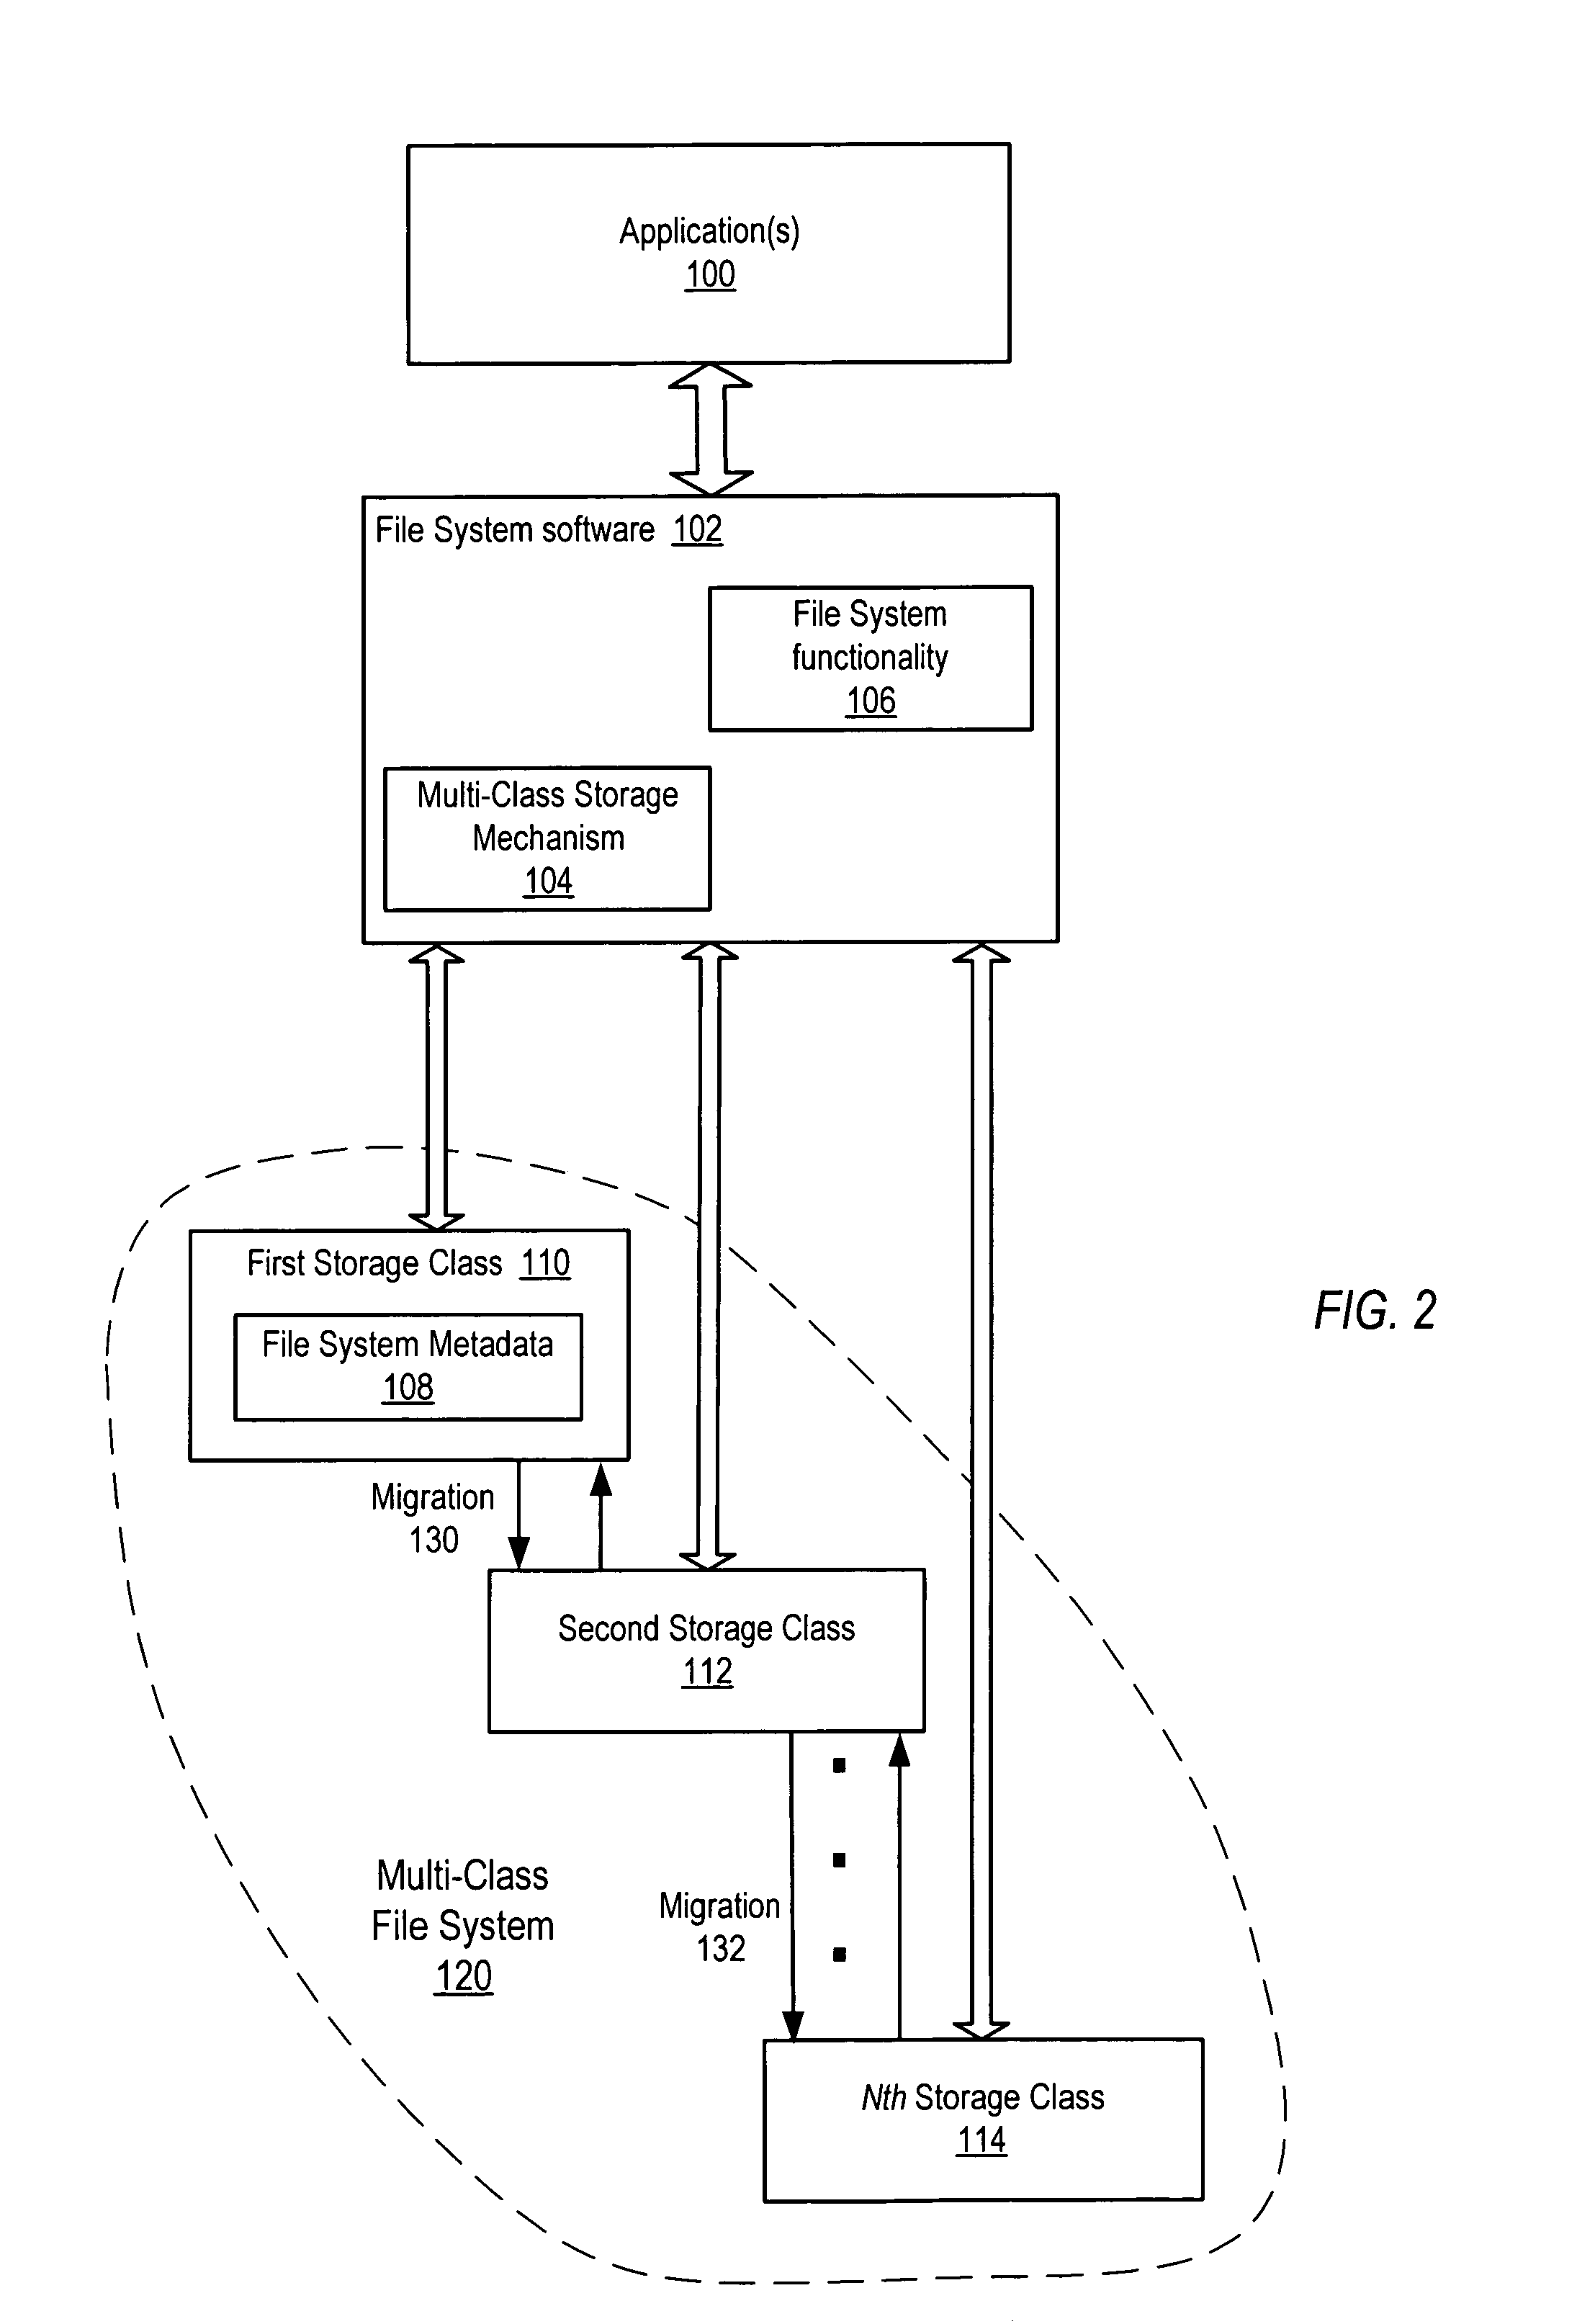 Performing operations without requiring split mirrors in a multi-class file system